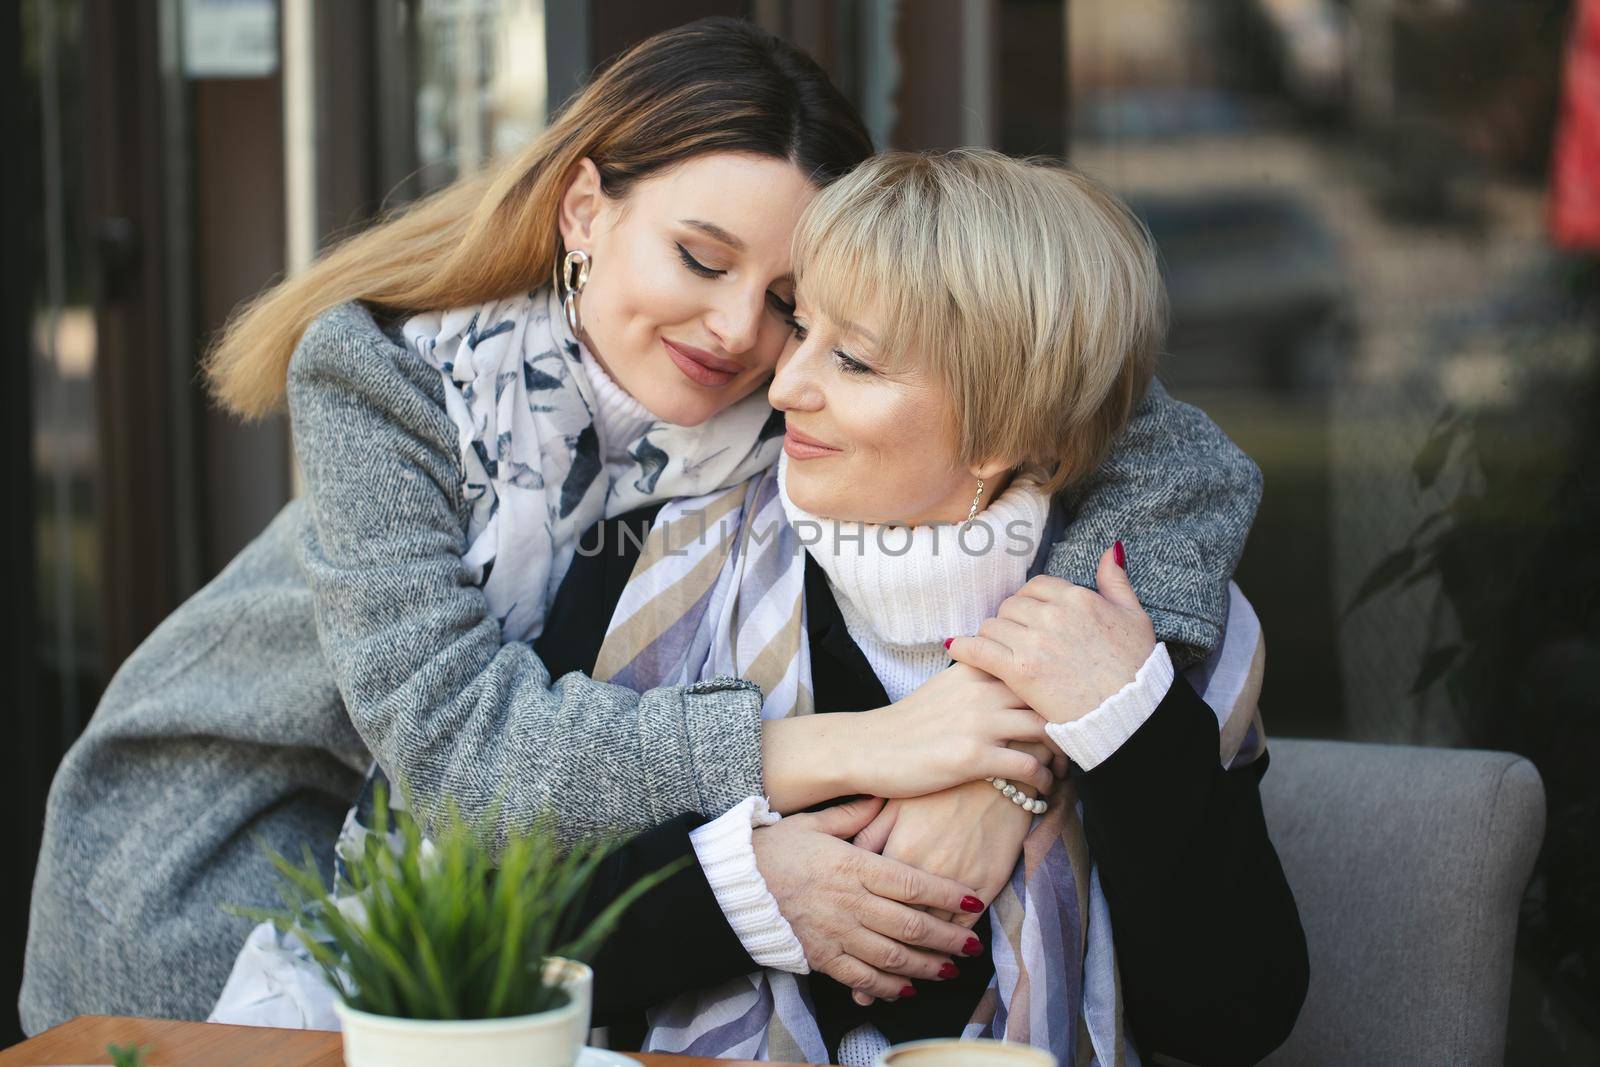 An adult daughter hugs and kisses her elderly mother when they meet in a cafe.